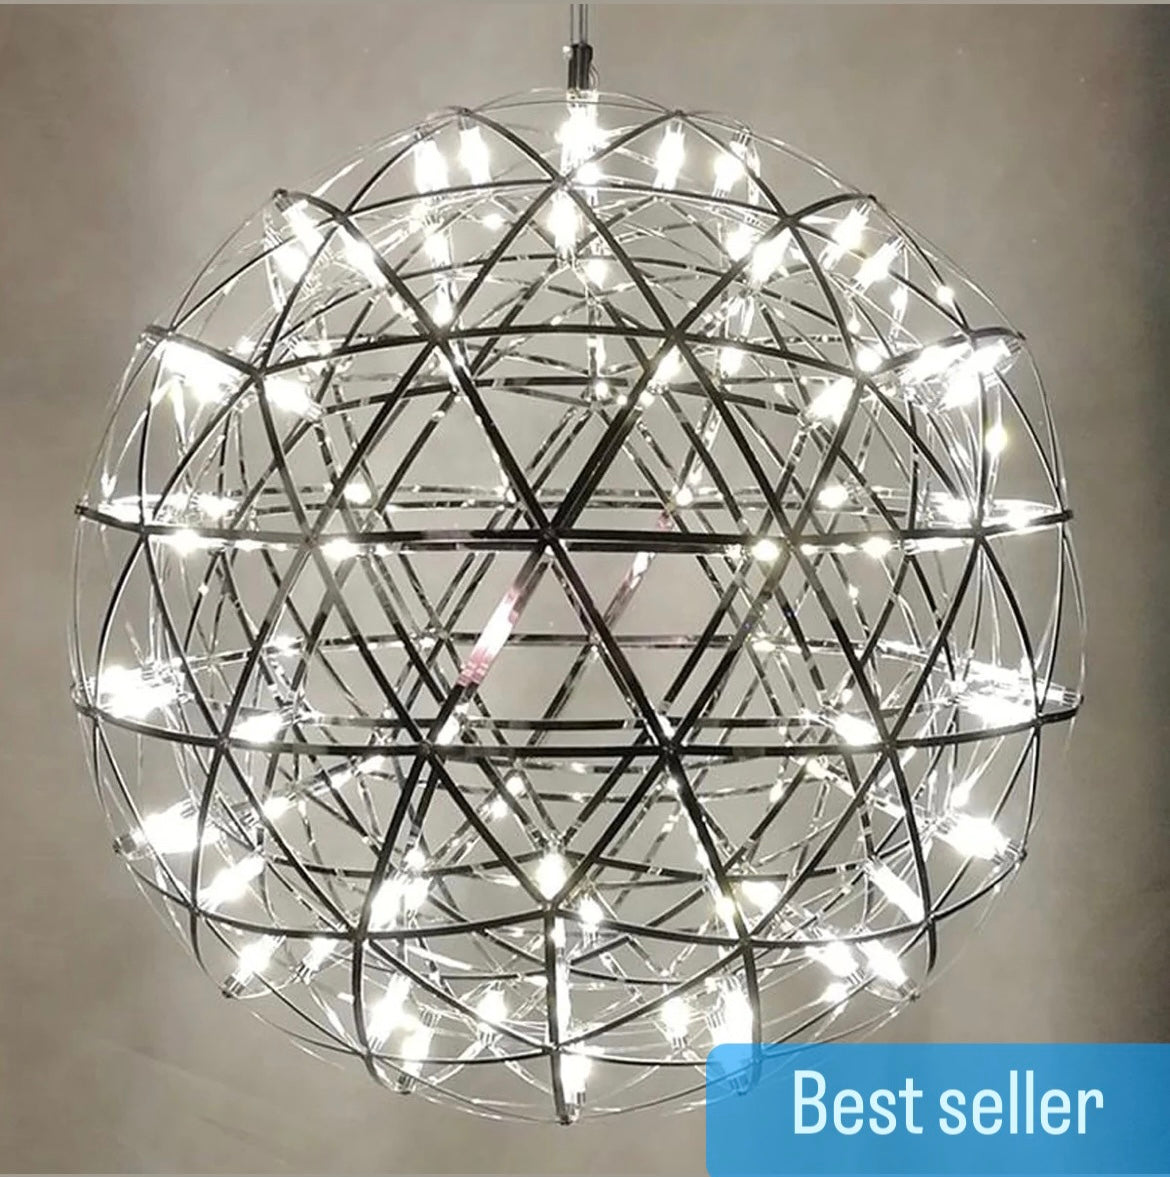  Our striking 40cm large silver starburst light is the perfect way to make a statement with your interiors. It is inspired by elements of the night sky, comprising of a delicately crafted stainless steel round spherical shape and perfectly finished in LED lights  This LED starburst sparkle pendant light will create a talking point in any space and can be placed together with the other size starburst lights to create something truly spectacular